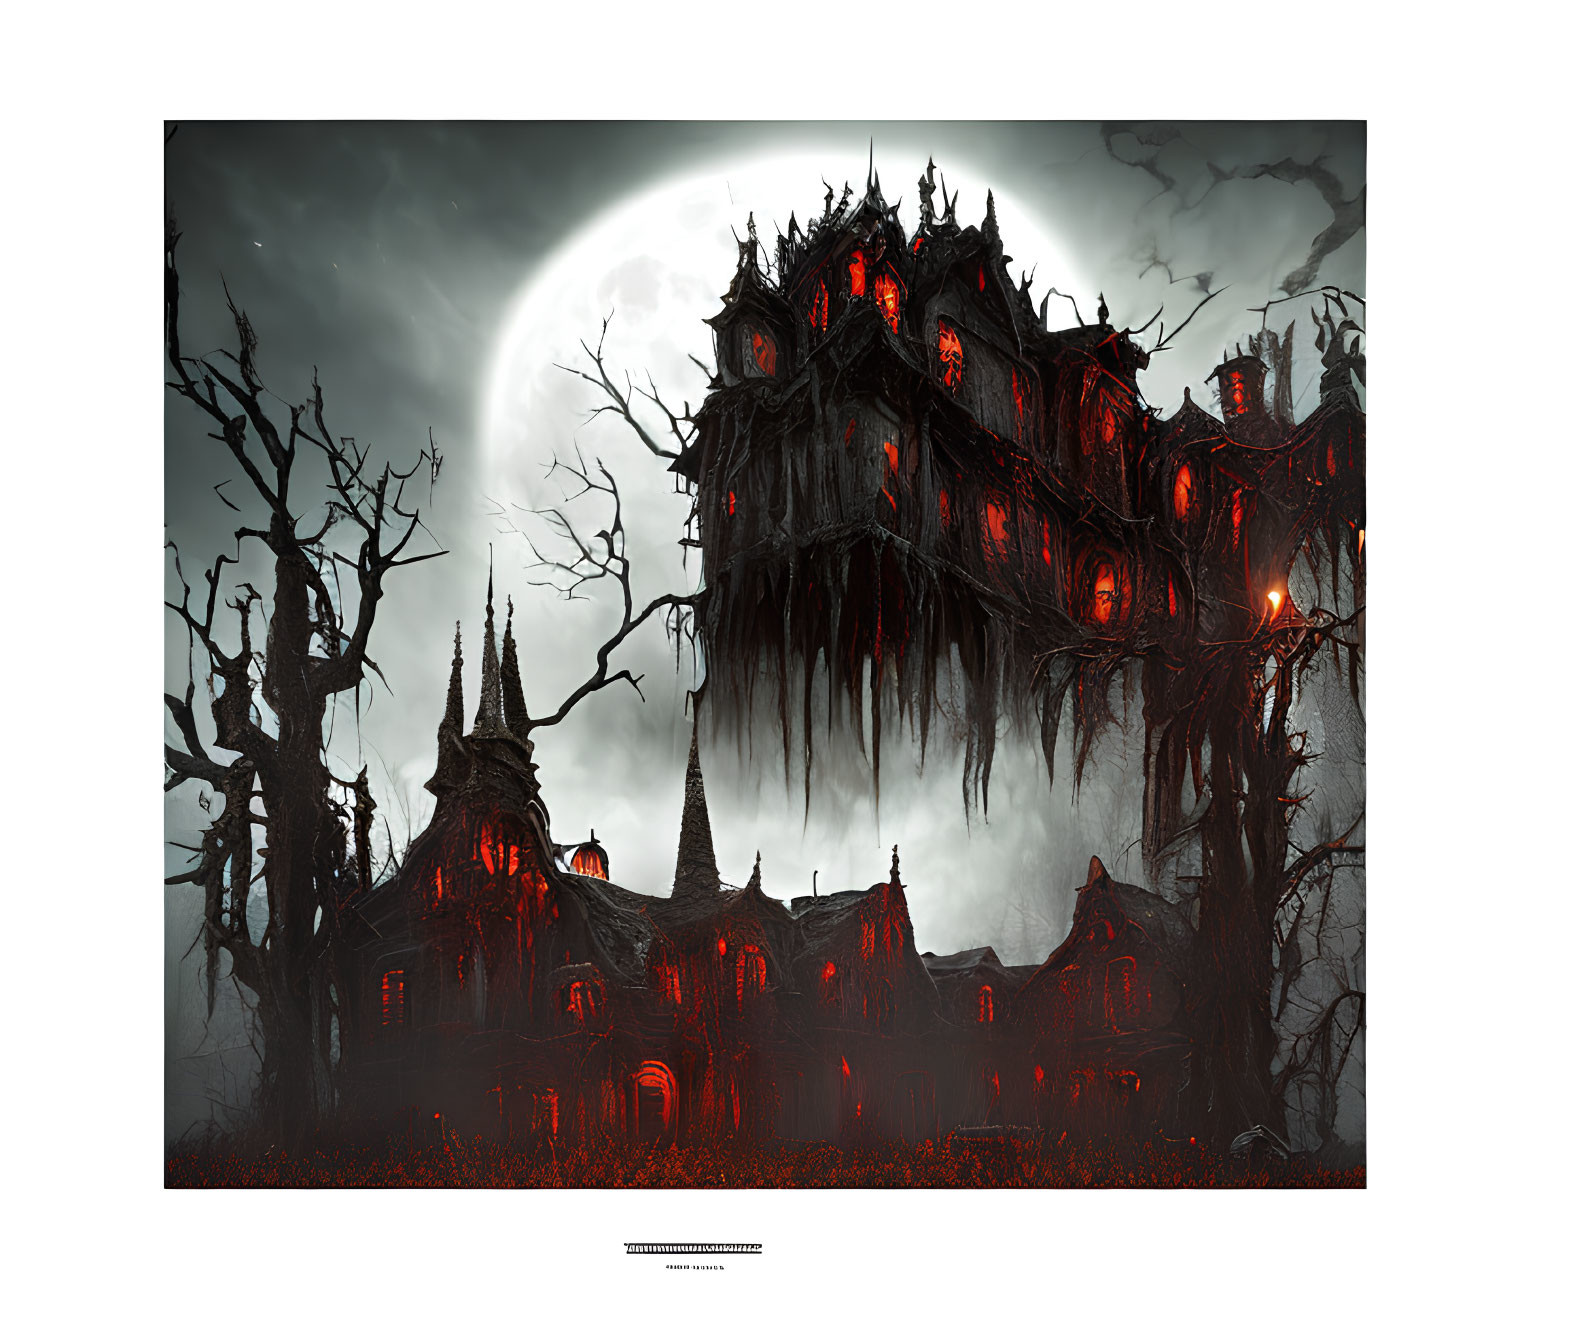 Eerie gothic mansion under full moon with red lights and misty landscape